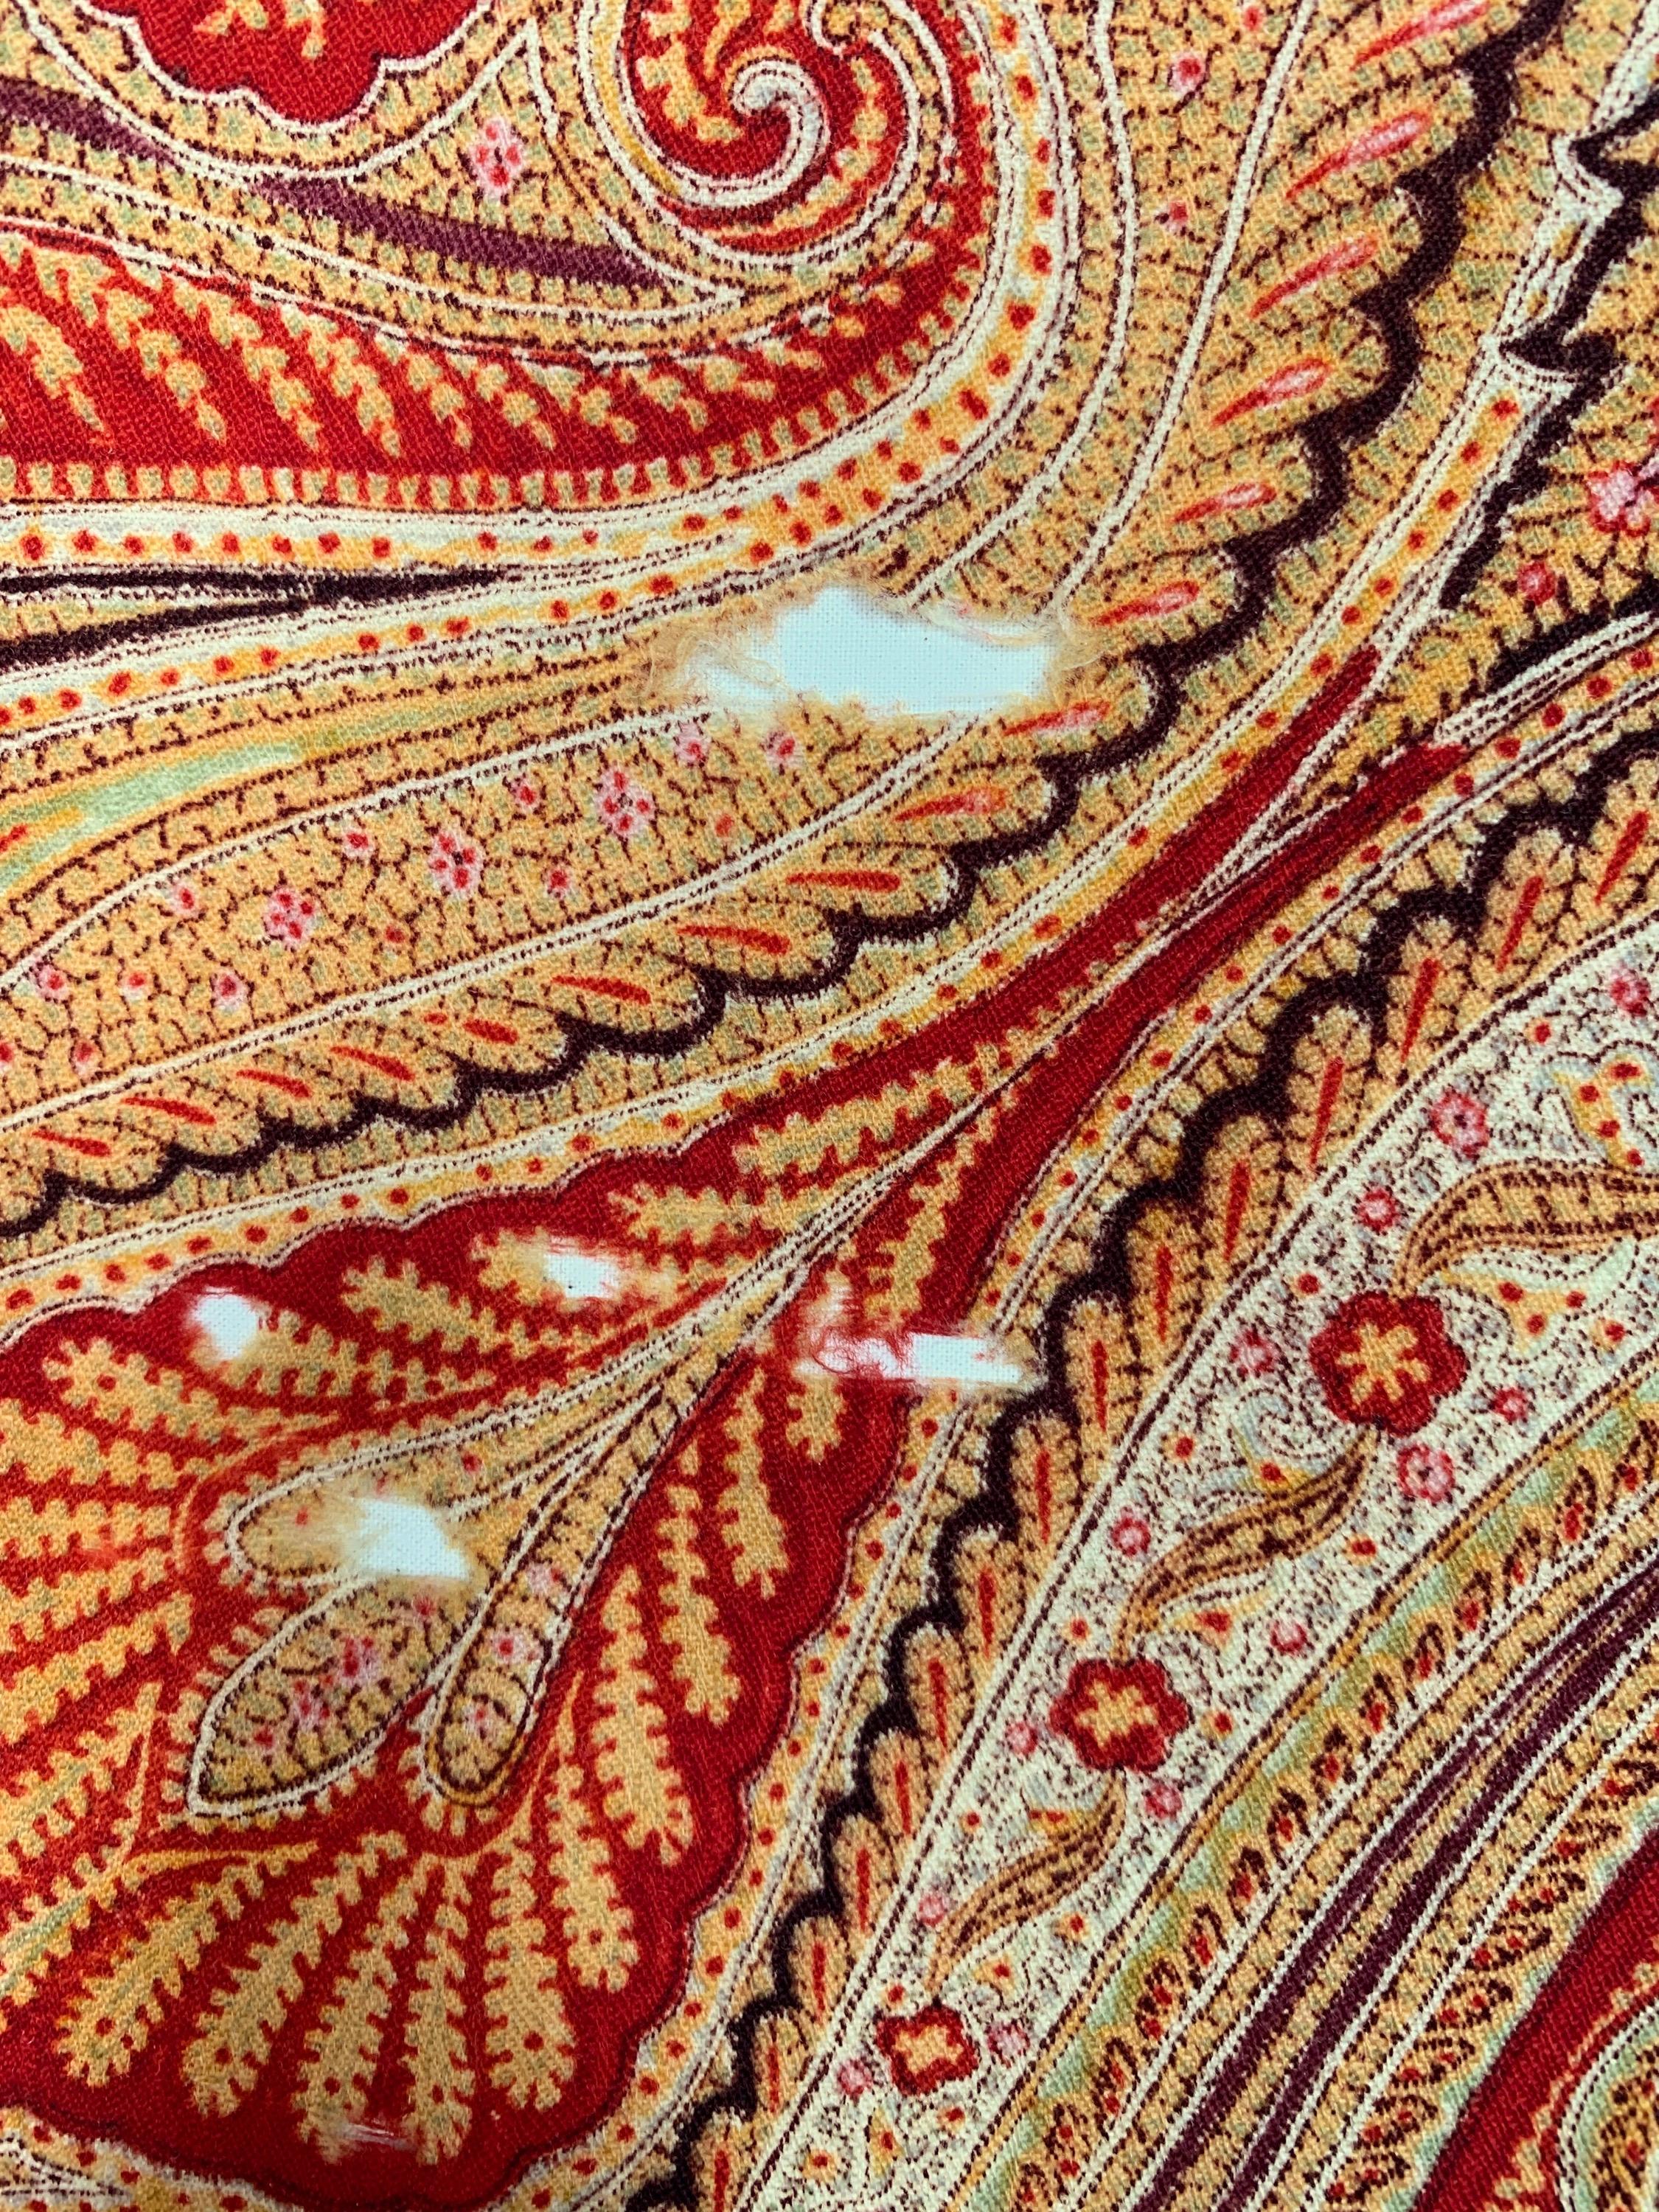 19th Century Printed Paisley Design British Wool Shawl In Good Condition For Sale In New York, NY